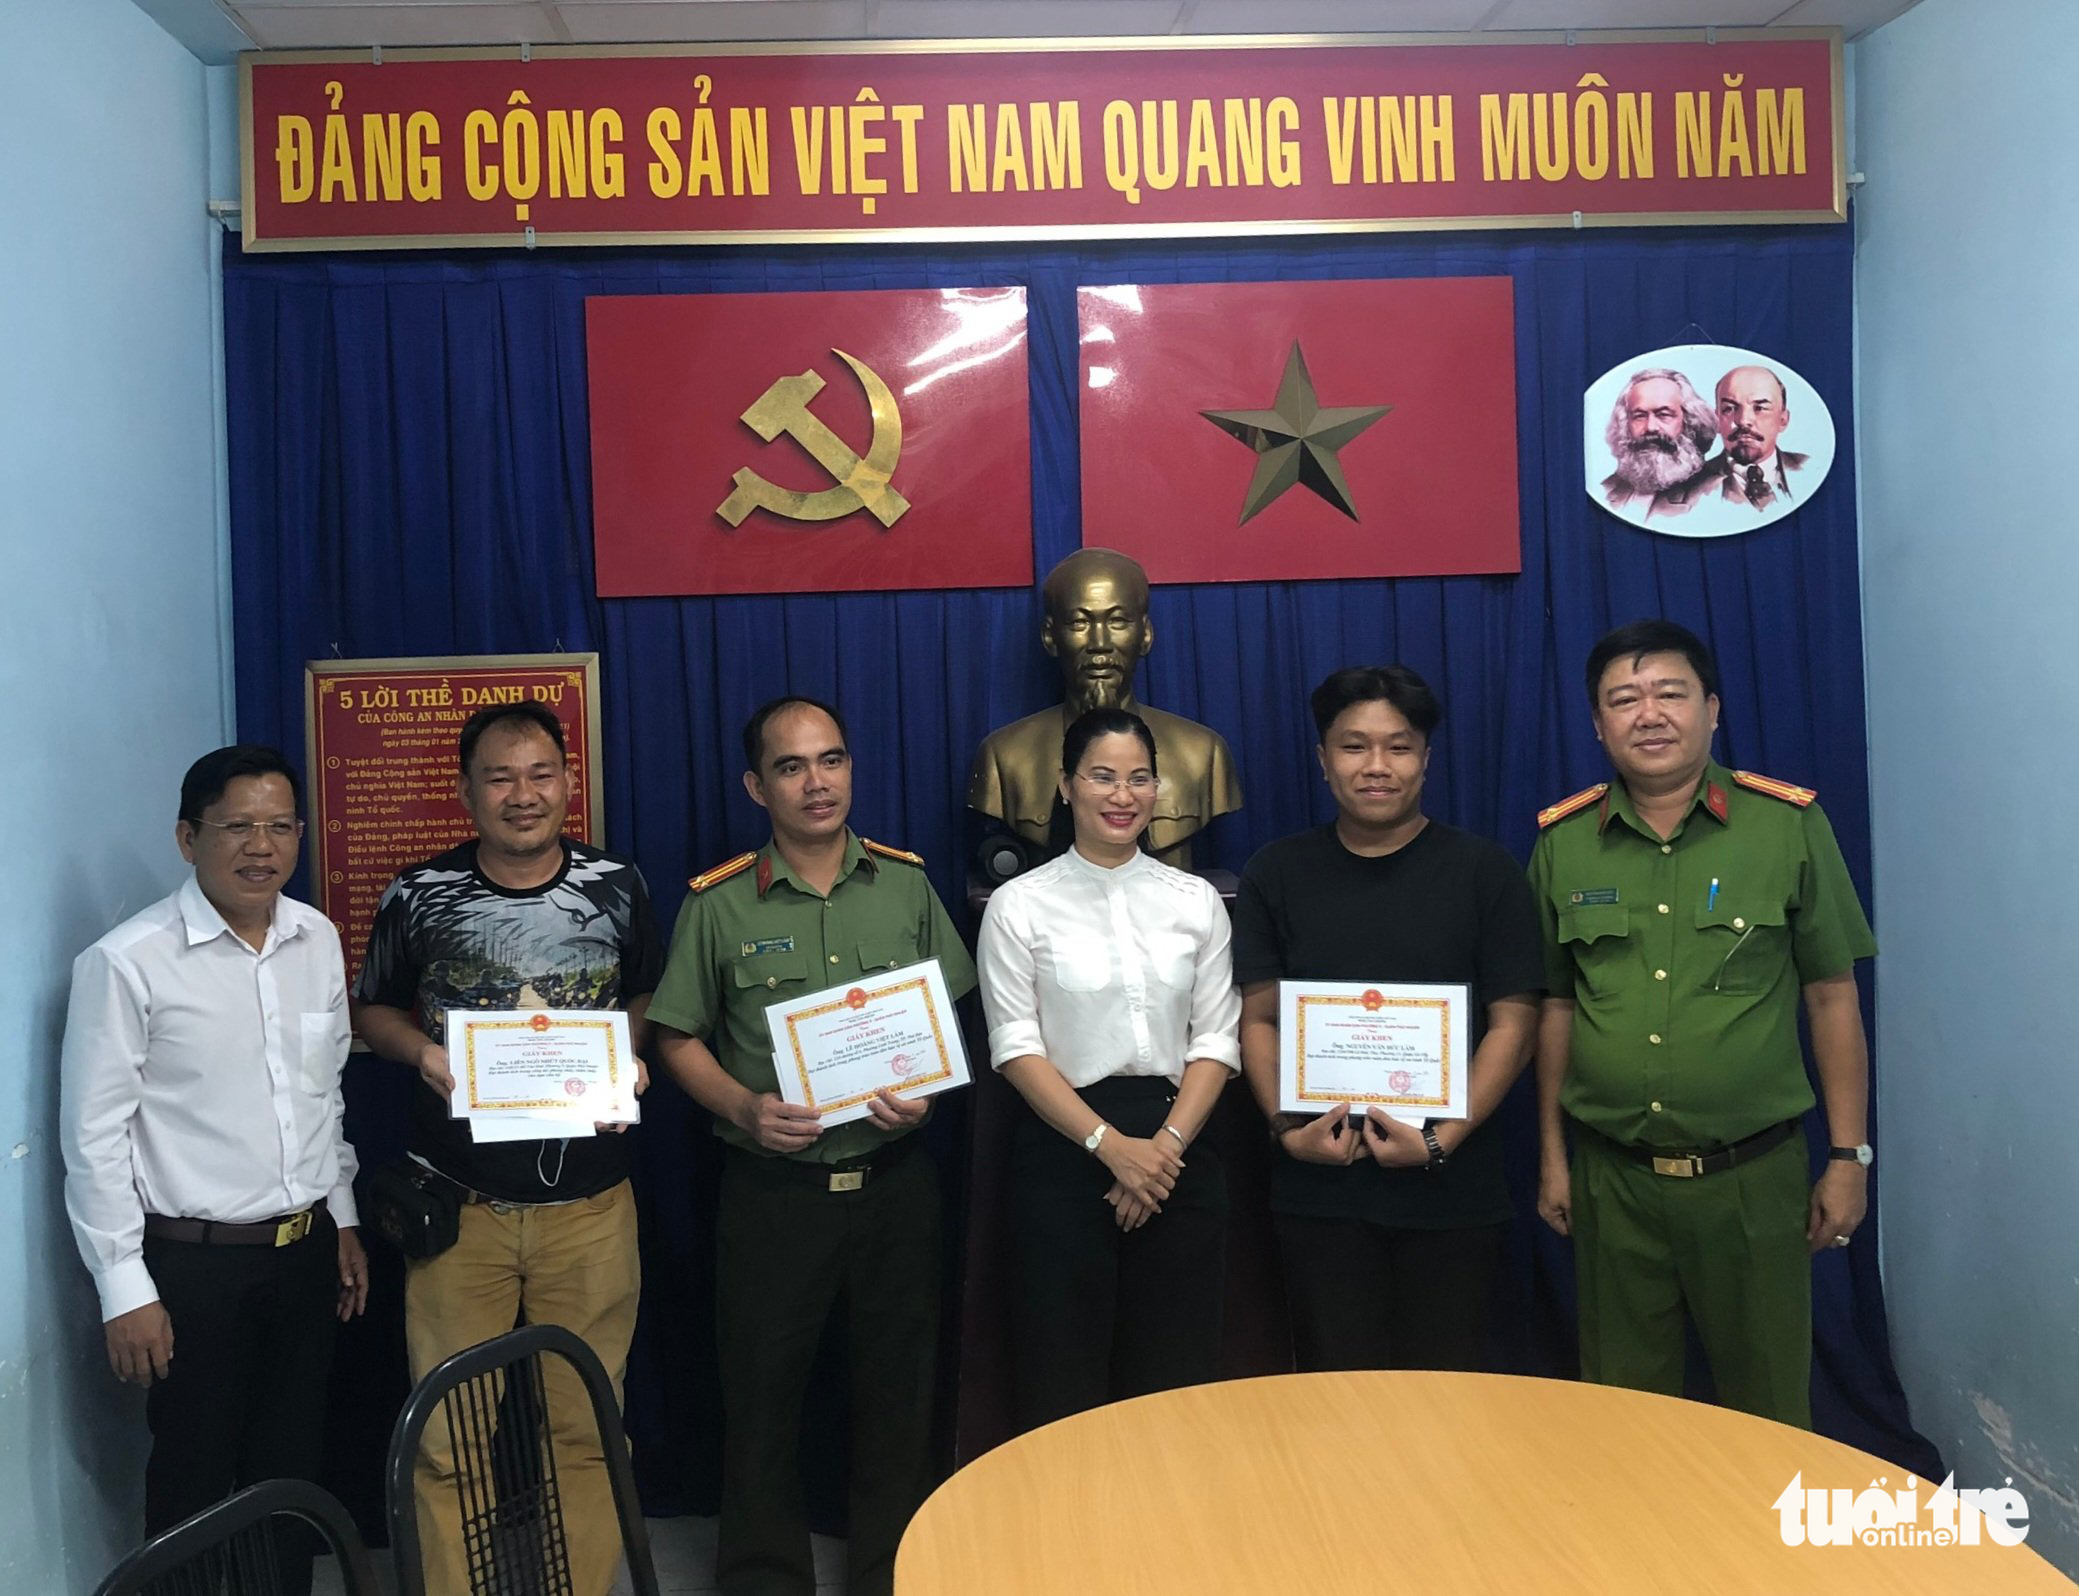 Officials award certificates of honor to three men for their brave acts to protect public order in Phu Nhuan District, Ho Chi Minh City, April 18, 2020. Photo: D.T. / Tuoi Tre